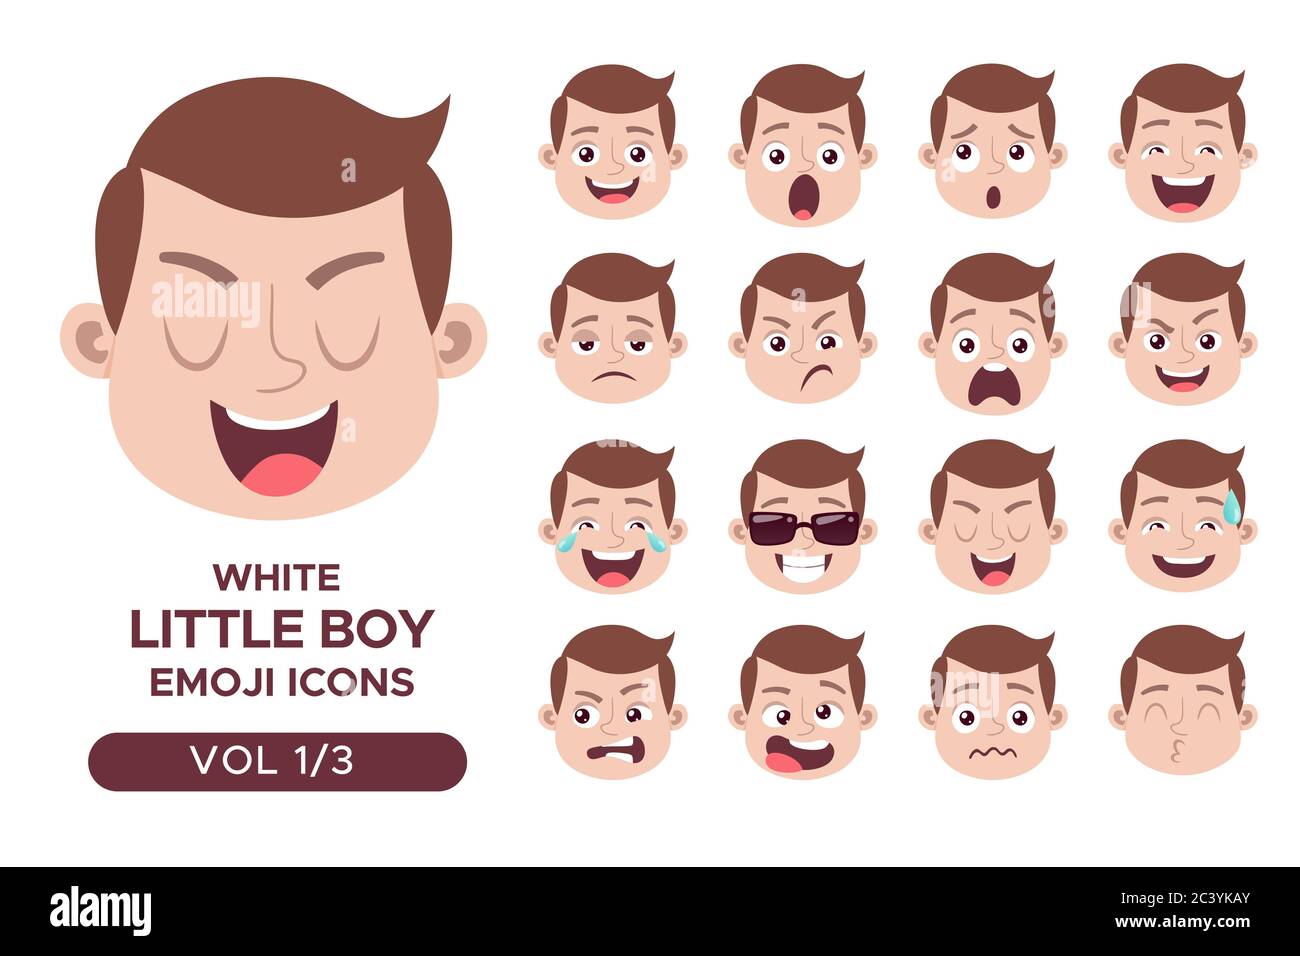 Boy facial emotion avatar set. White little boy emoji character with different expressions. Vector illustration in cartoon style. Set 1 of 3. Stock Vector